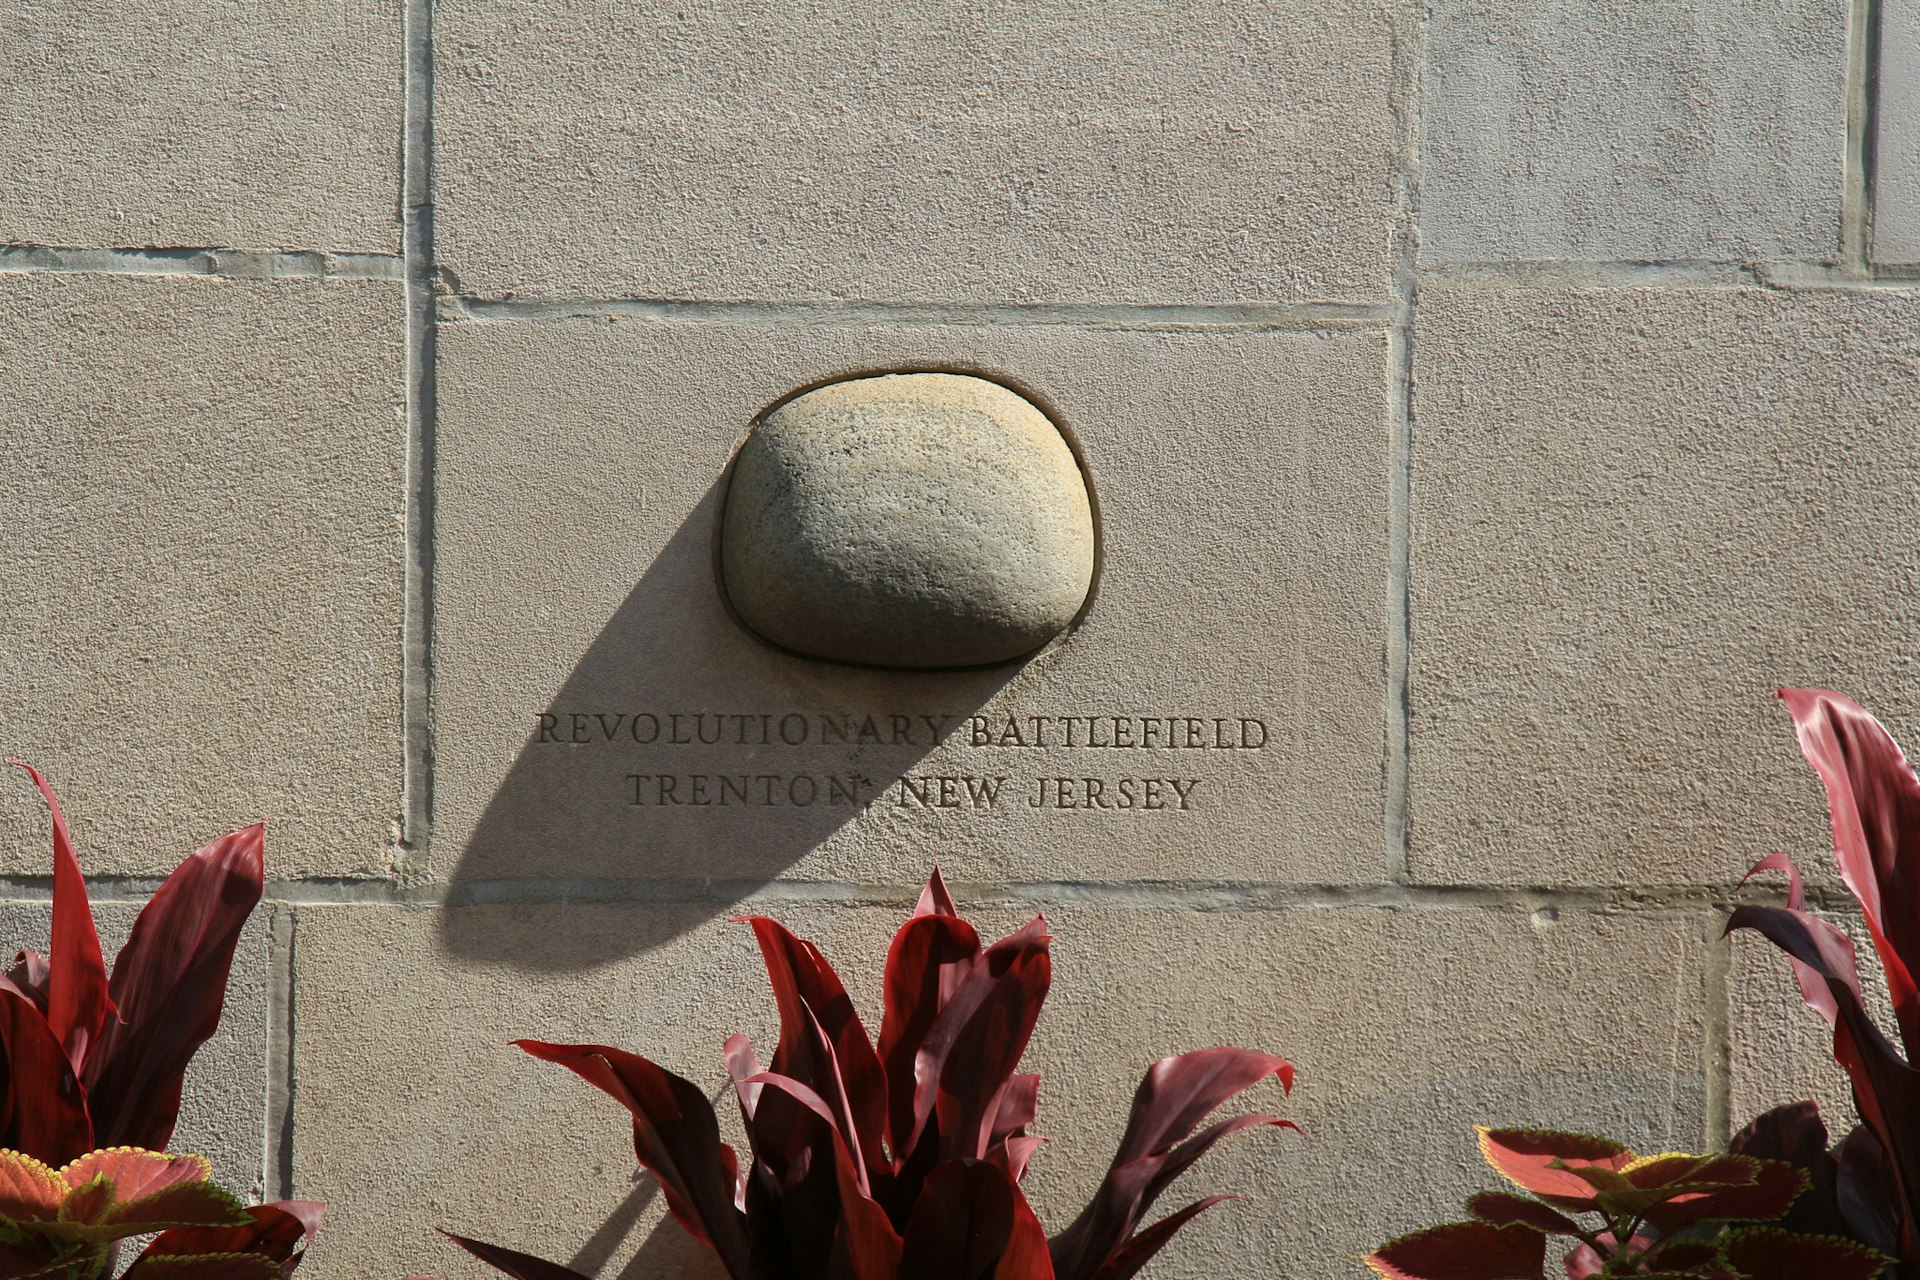 Detail of the base of the Tribune Tower. Photo by Jason Raia / CC BY 2.0